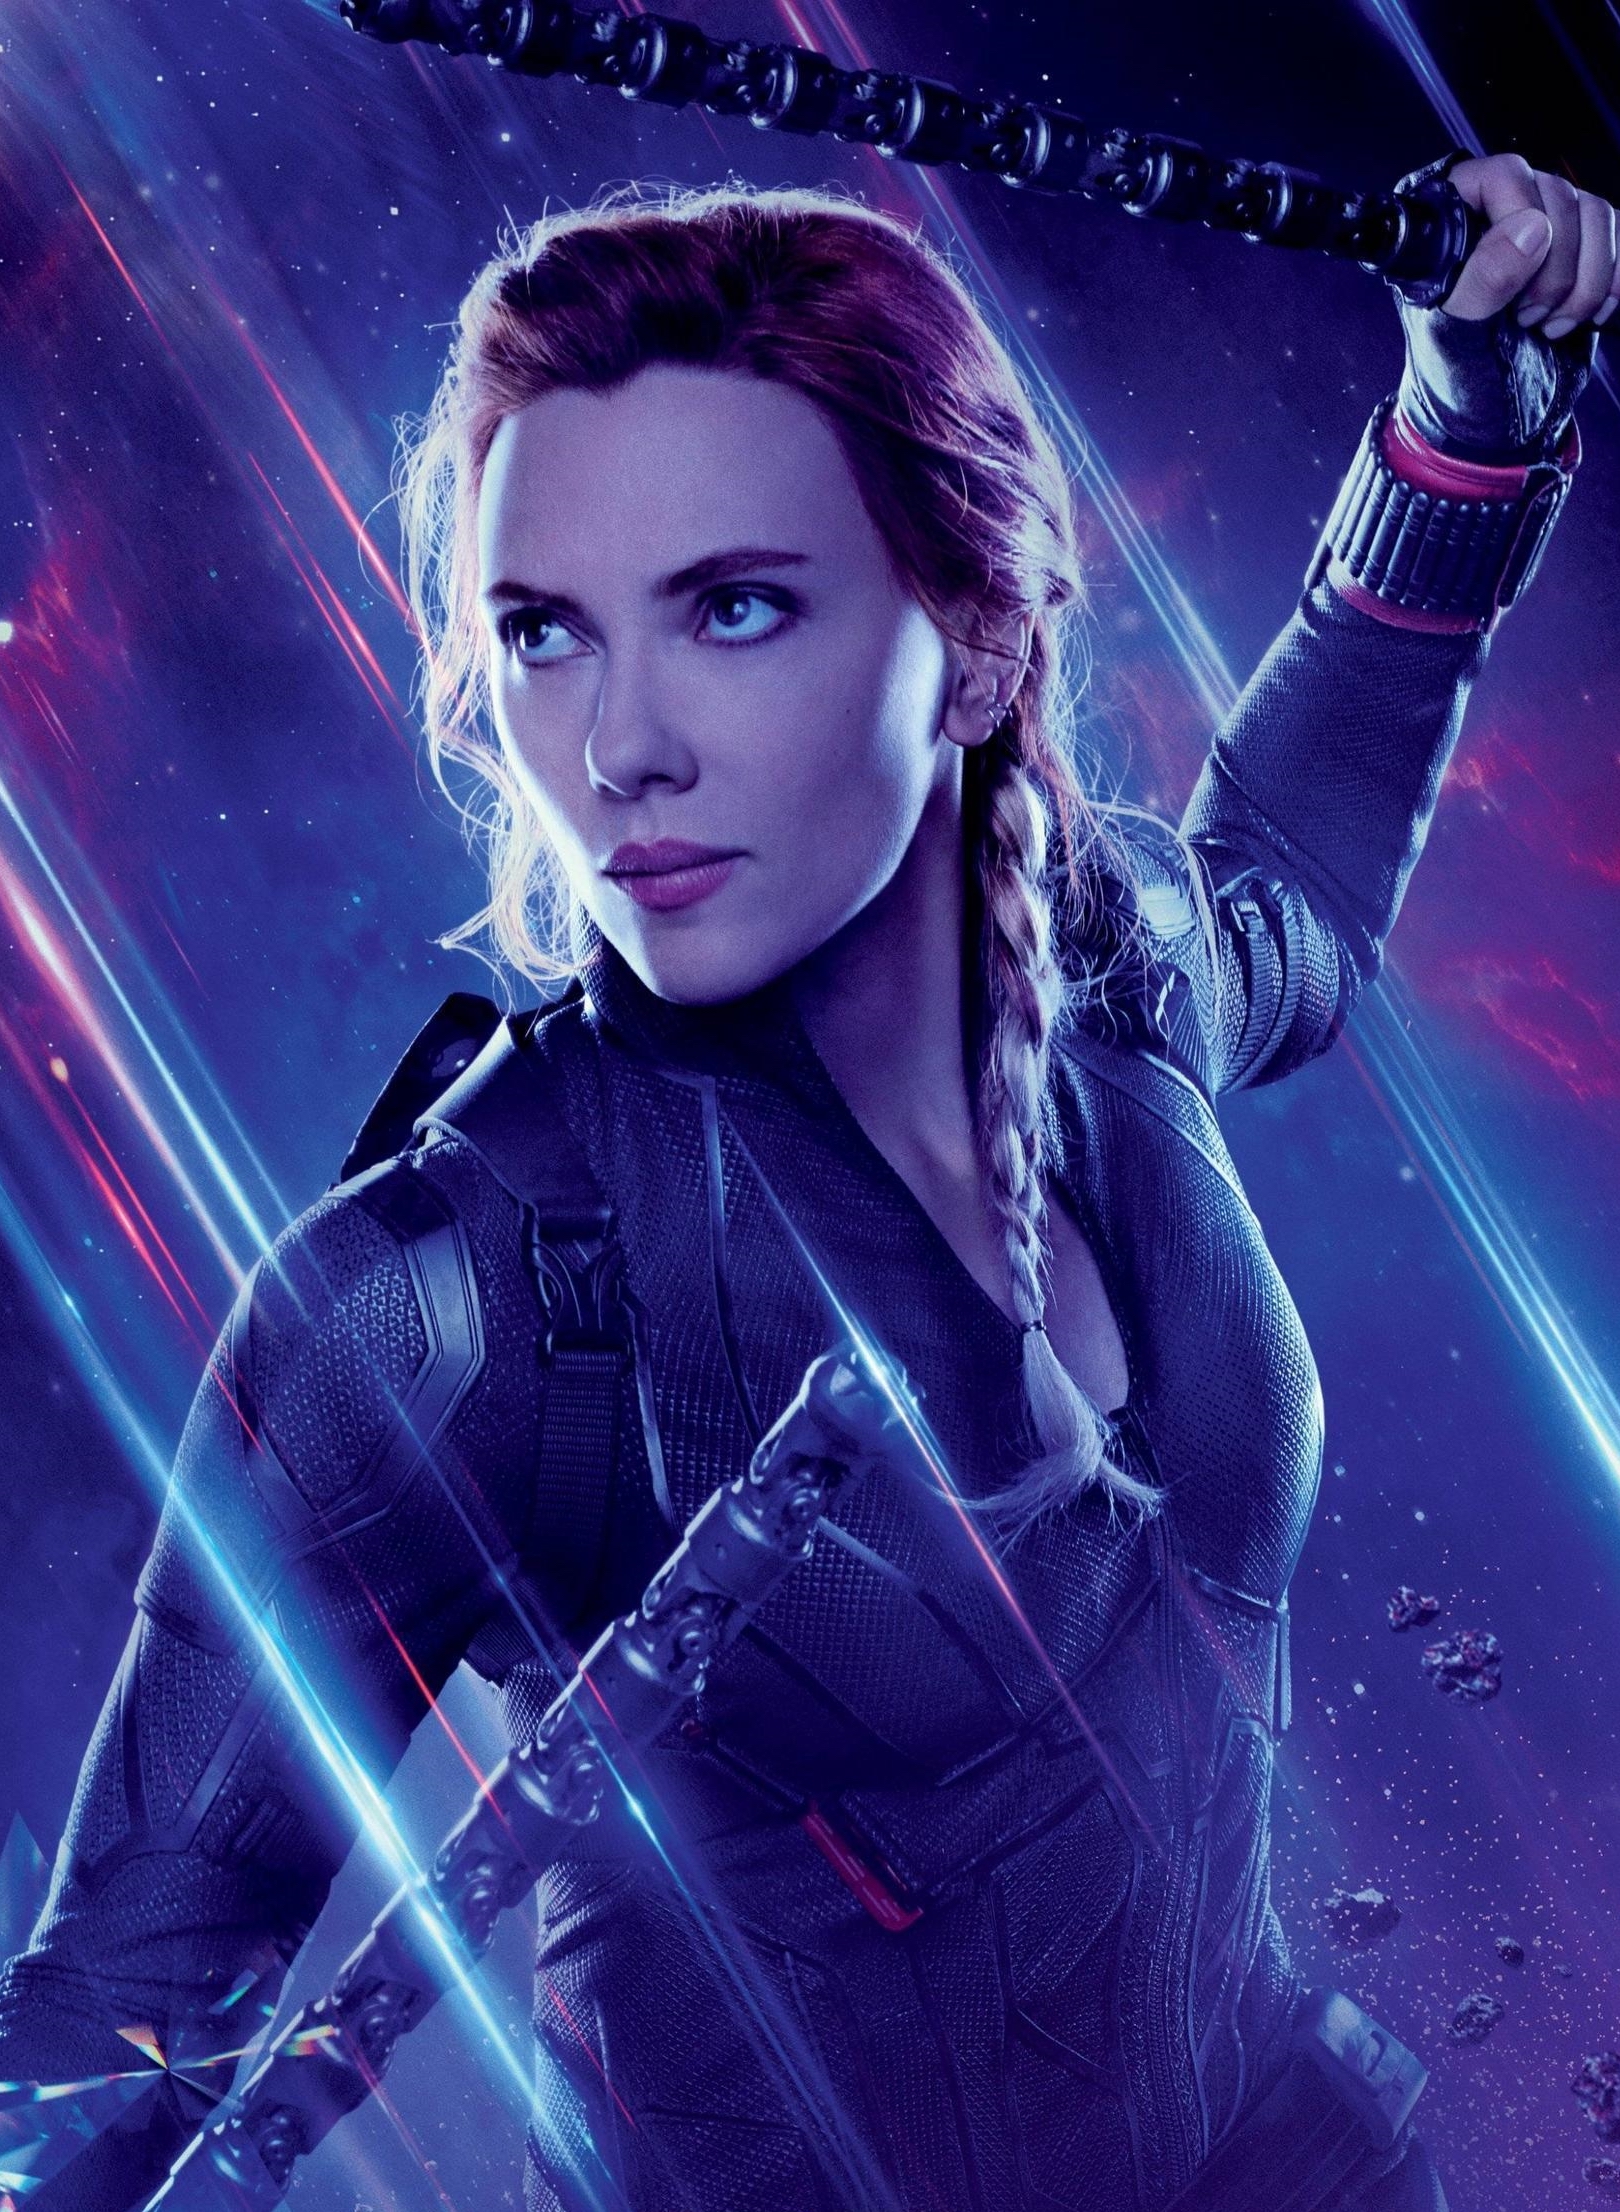 Marvel Avengers Game Black Widow Skills / Marvel S Avengers Black Widow Skill Tree Every Ability Explained / Looking for marvel's avengers game cheats on pc, ps4 & xbox one?